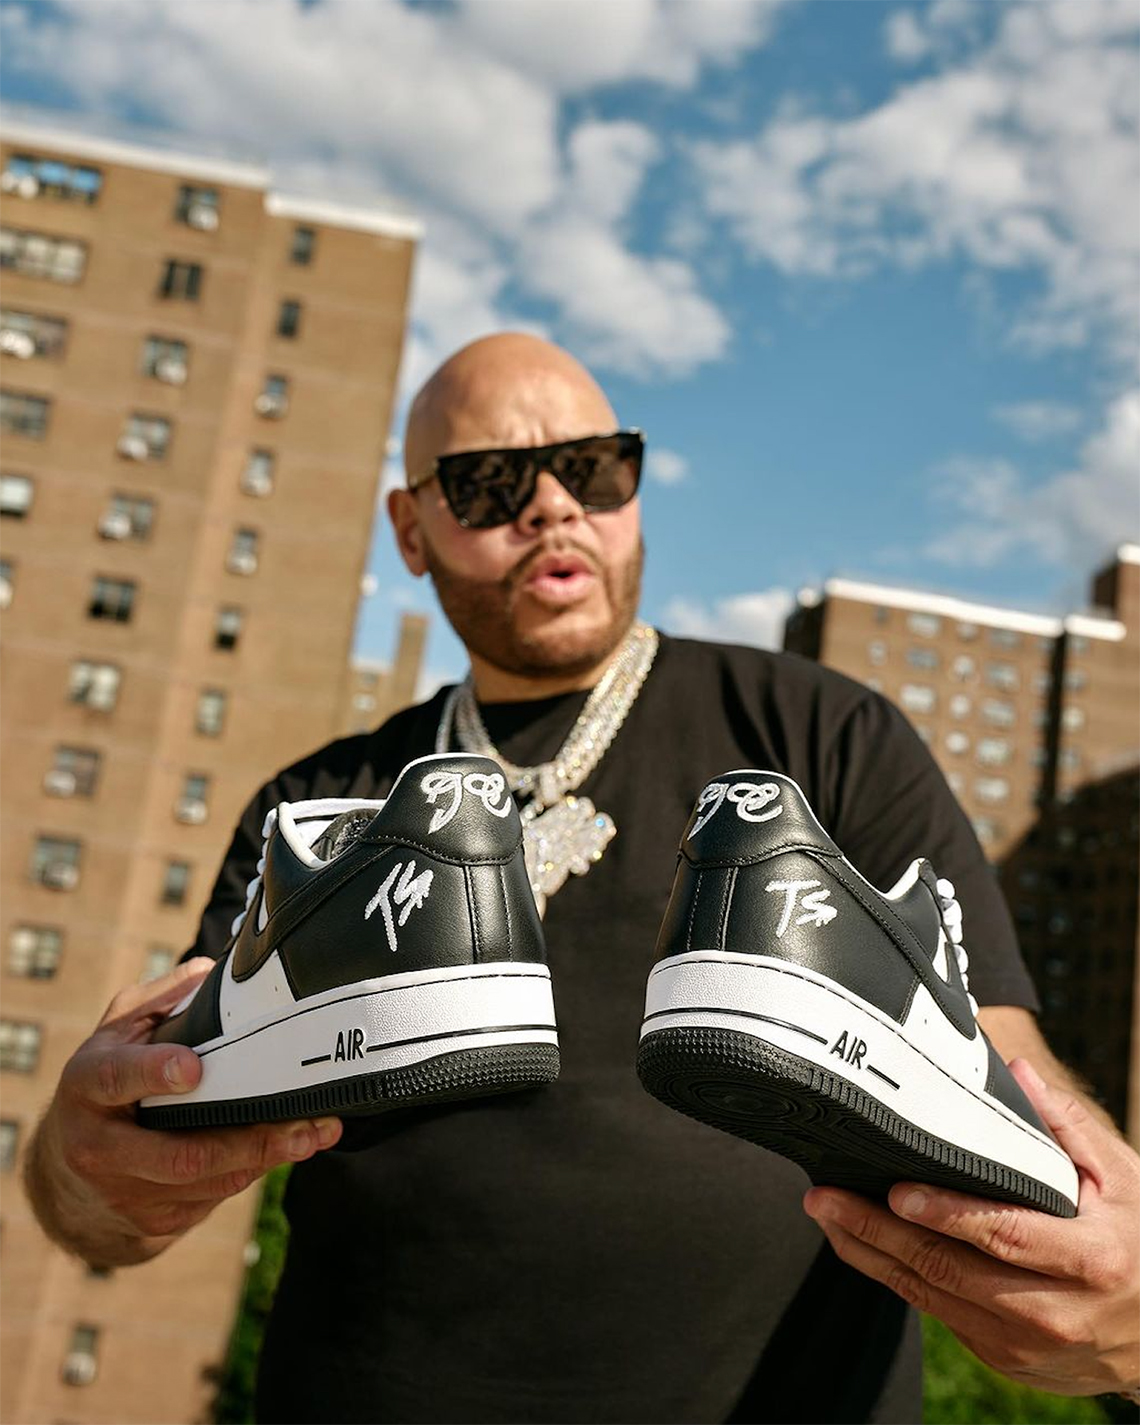 Fat Joe on Upcoming Terror Squad Nike Air Force 1s Release